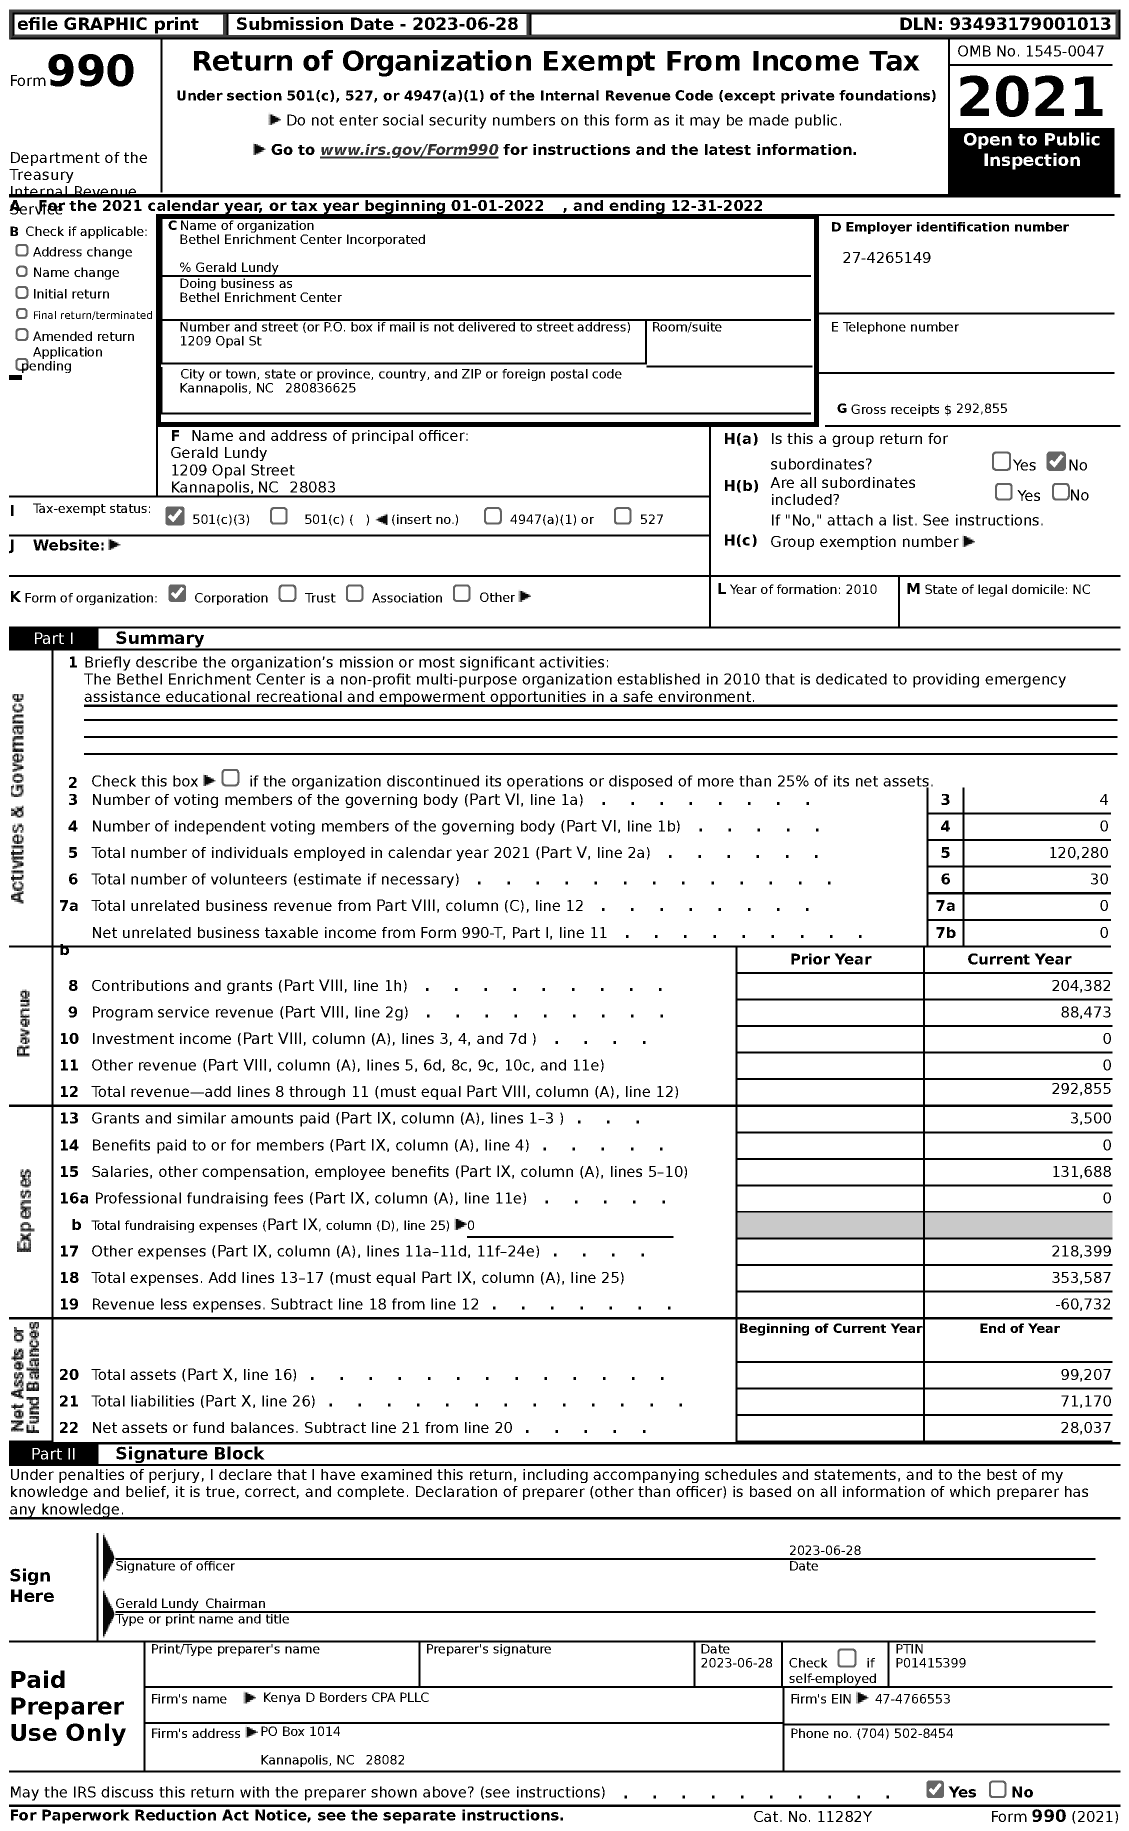 Image of first page of 2022 Form 990 for Bethel Enrichment Center